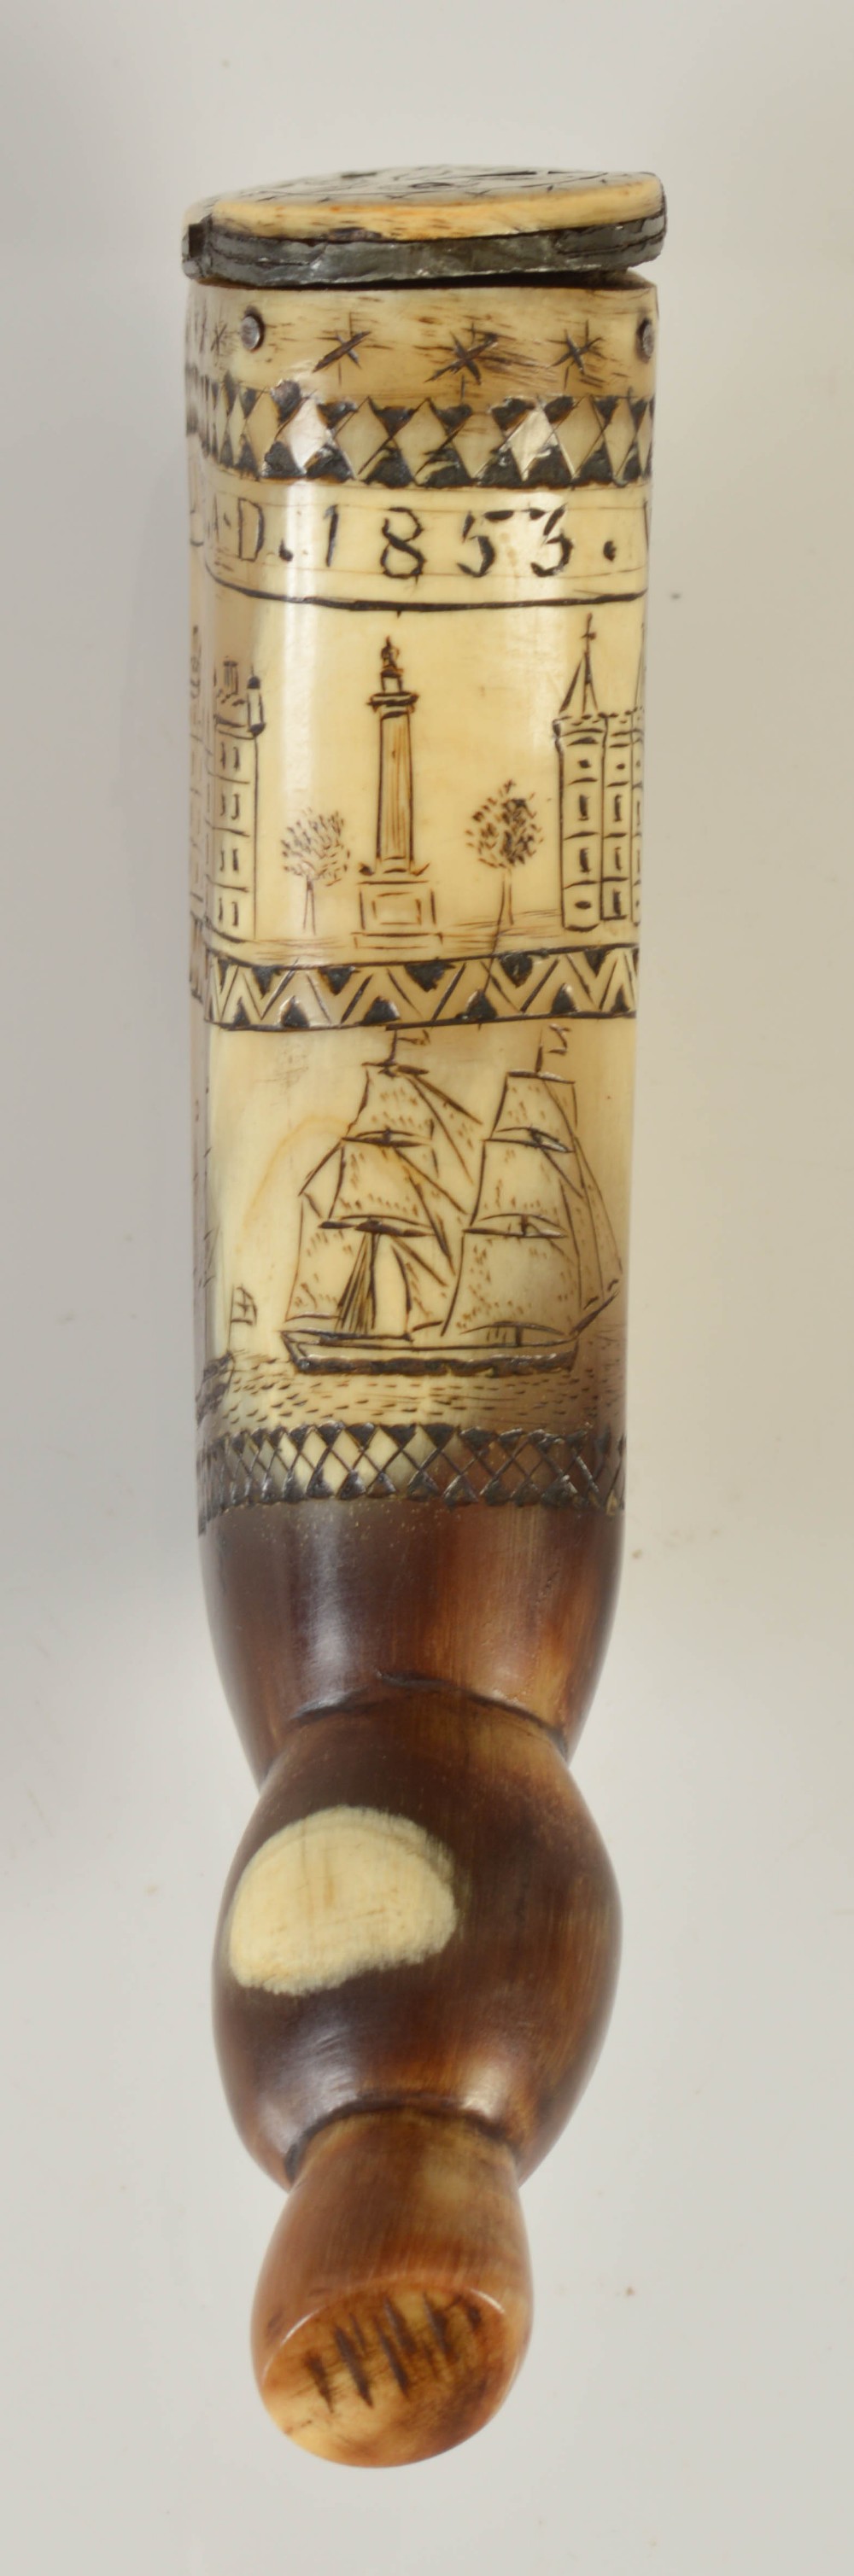 A mid 19th century flattened horn snuff mull, with scrimshaw scenes of Edinburgh and ships at sea, - Image 4 of 4